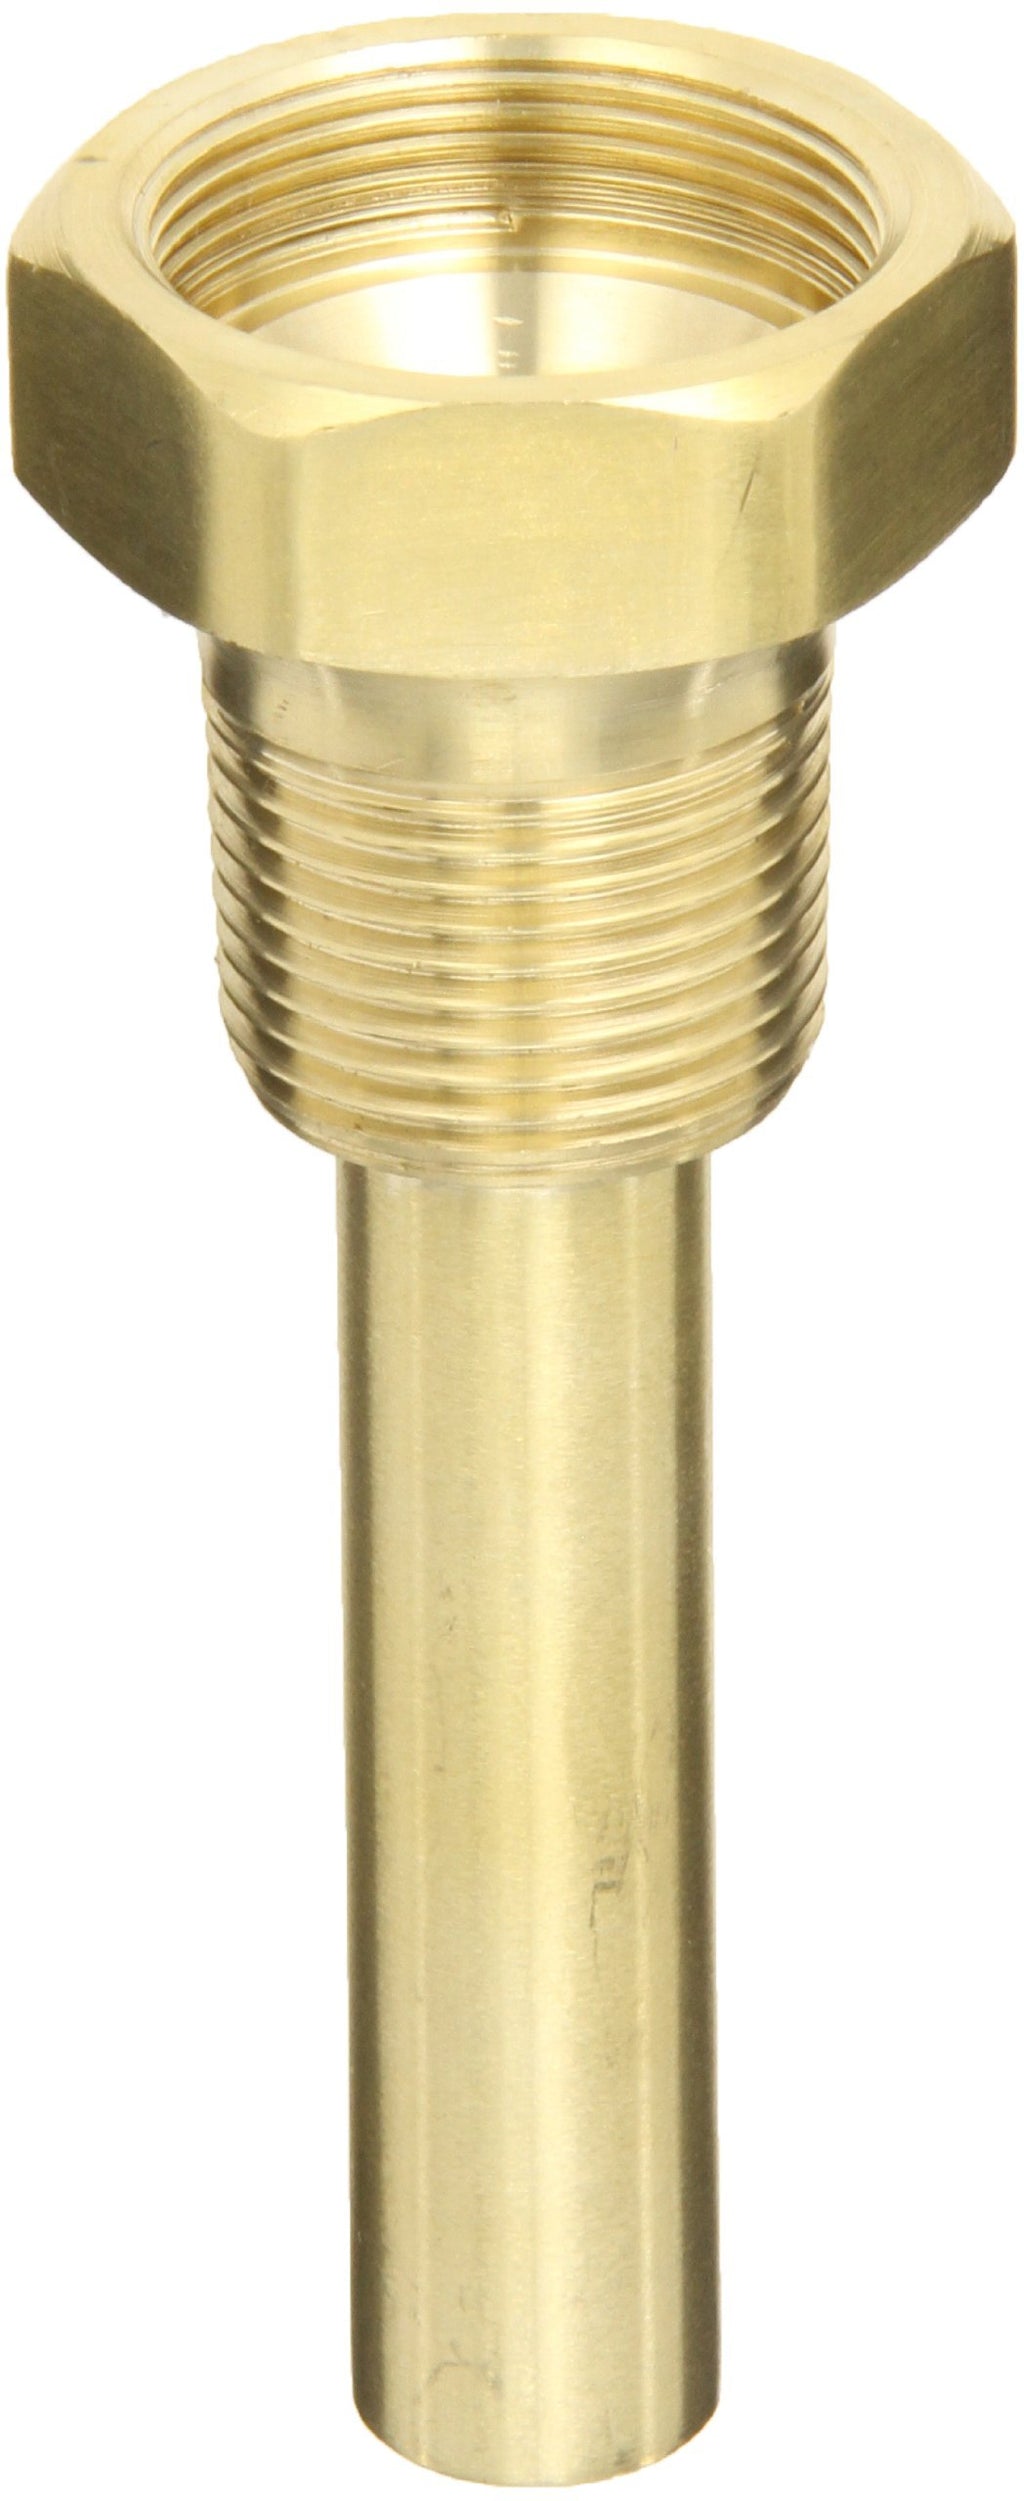 Trerice 3-4F2 Thermowells for Industrial Thermometers, 3/4" NPT Connection